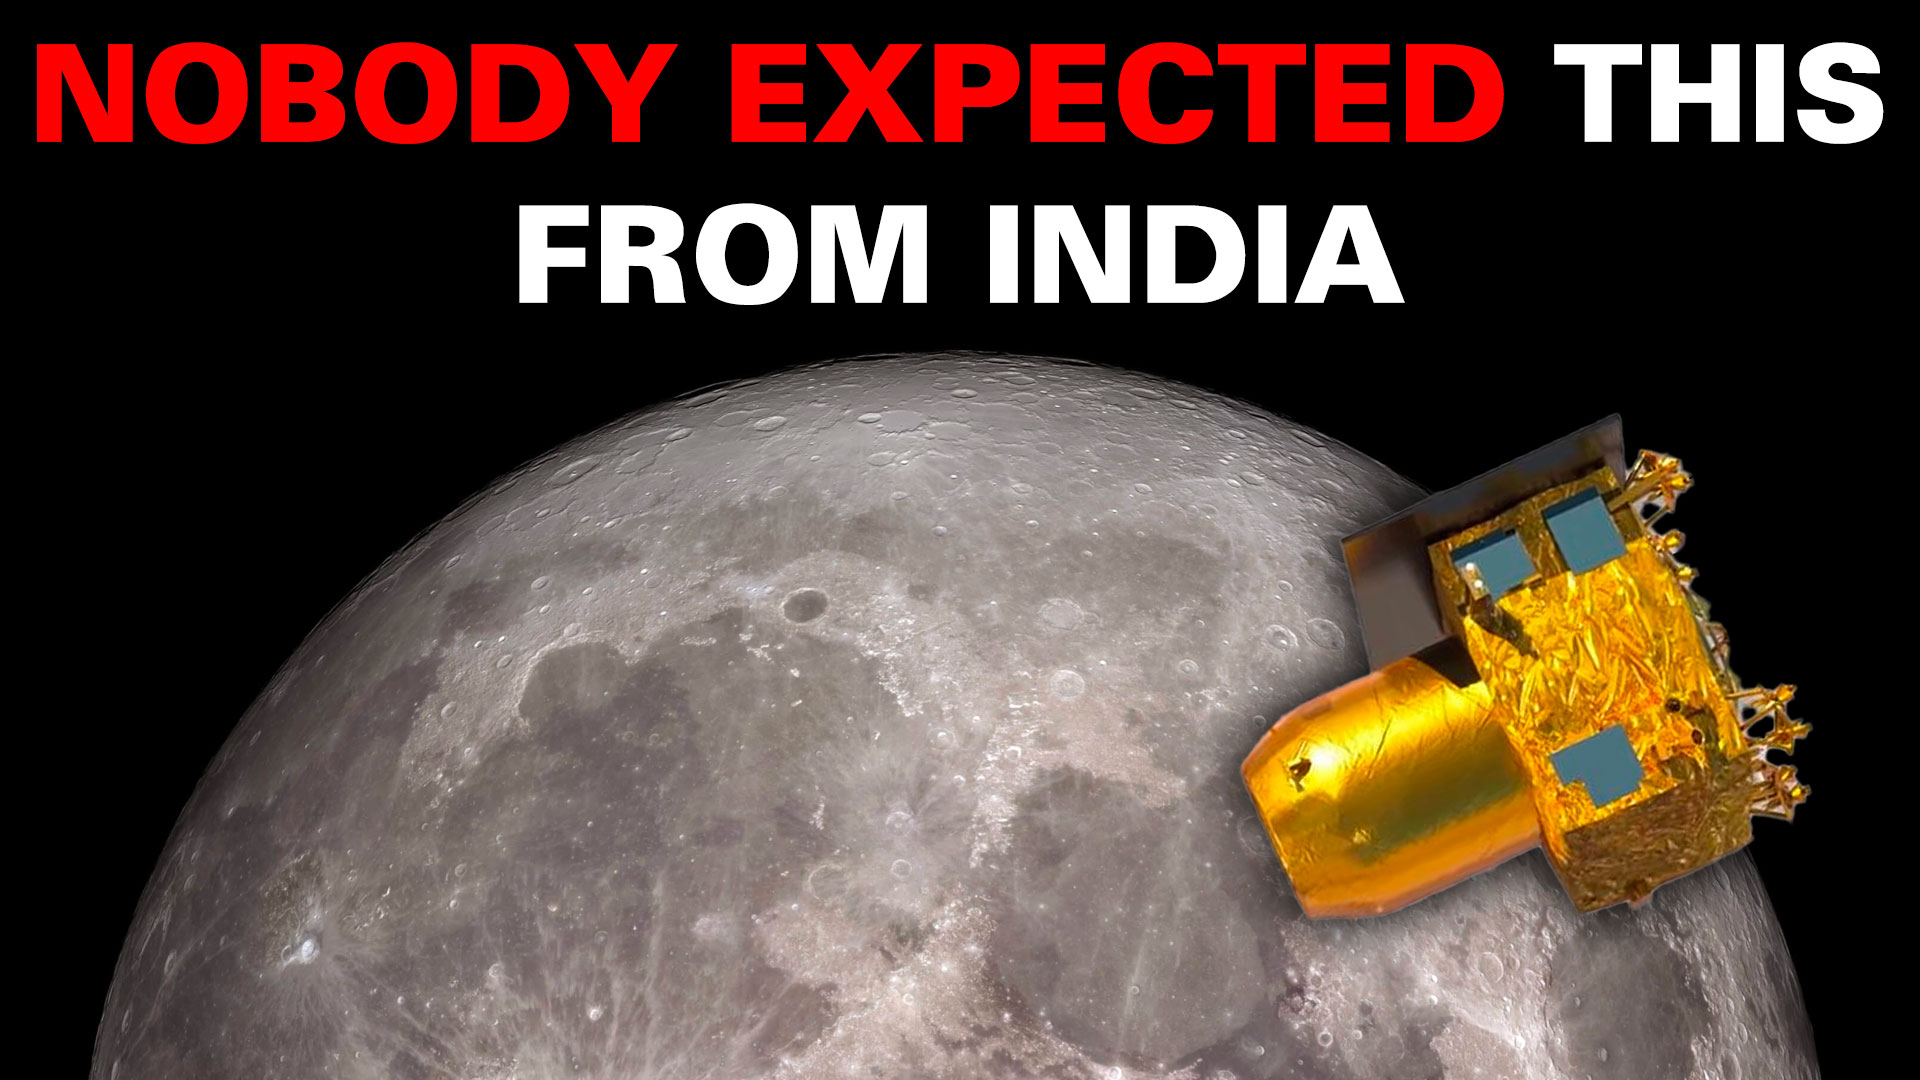 Chandrayaan-3 propulsion module in front of the Moon.